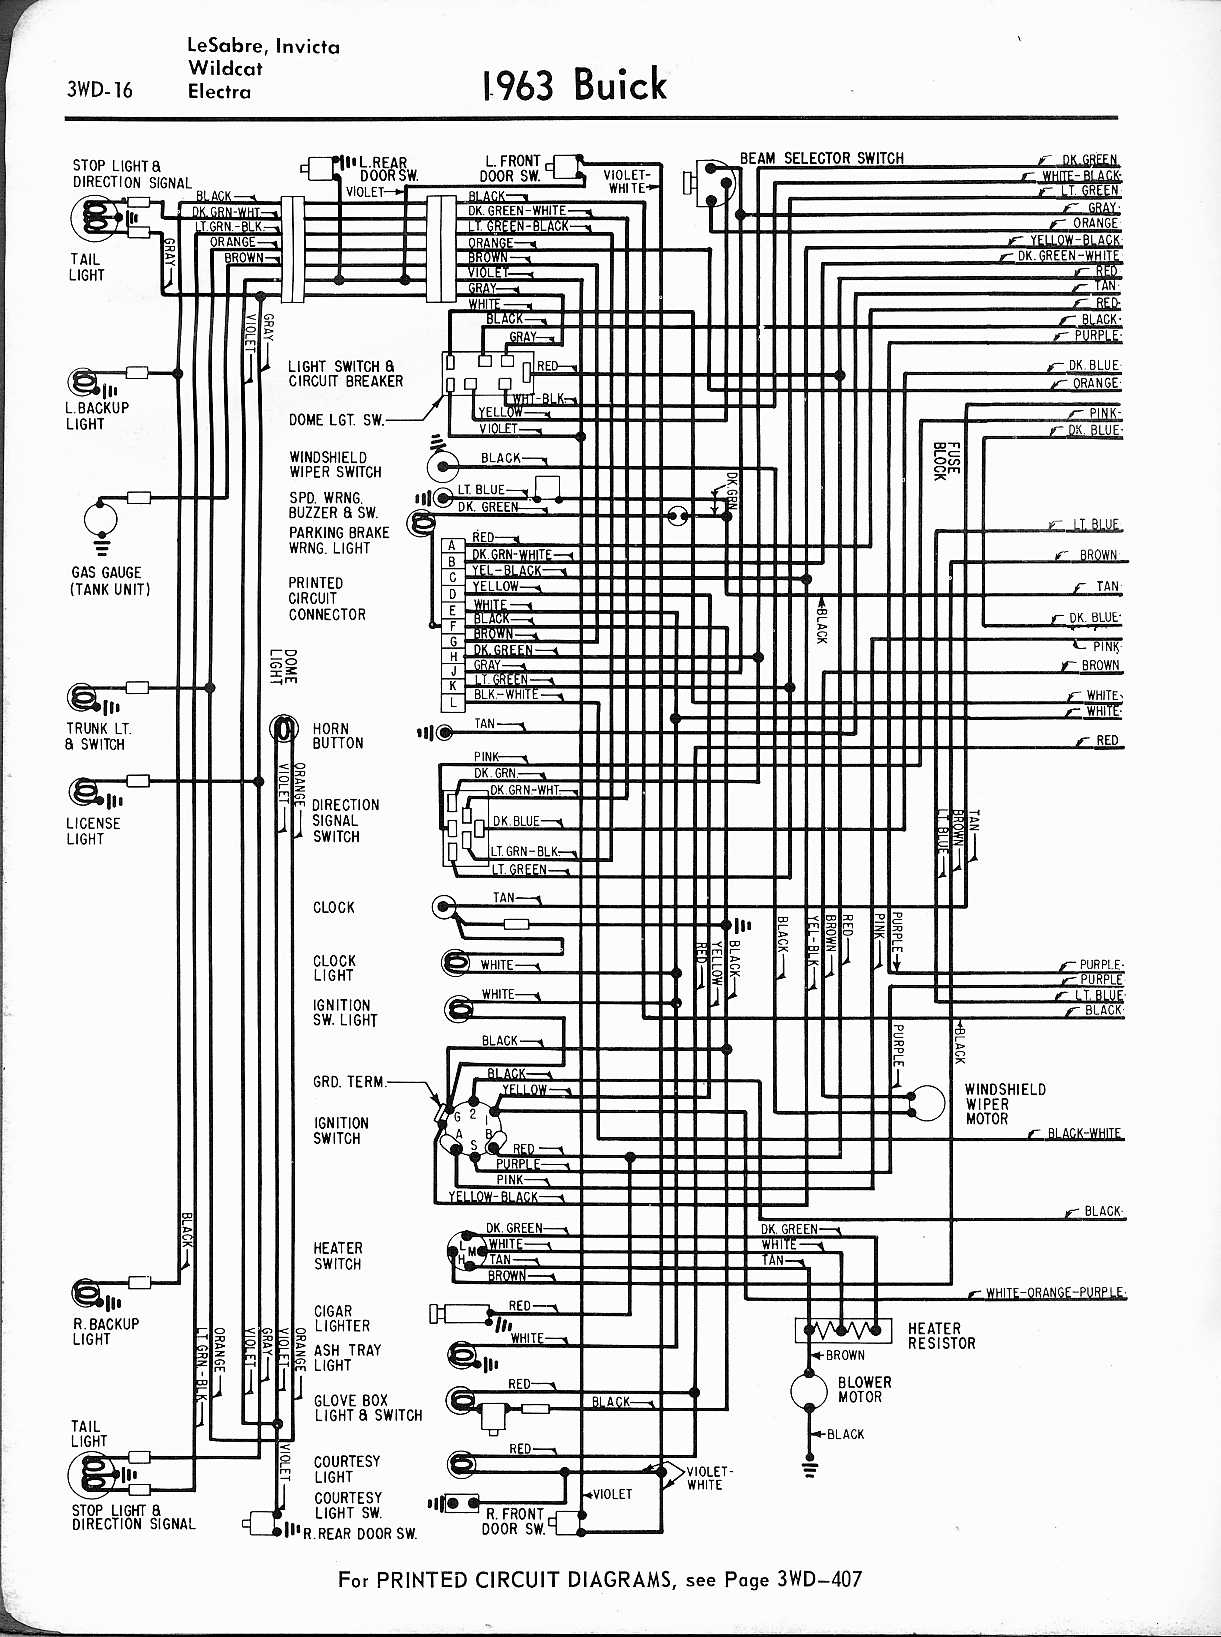 1995 Buick Lesabre Wiring Diagram from www.oldcarmanualproject.com